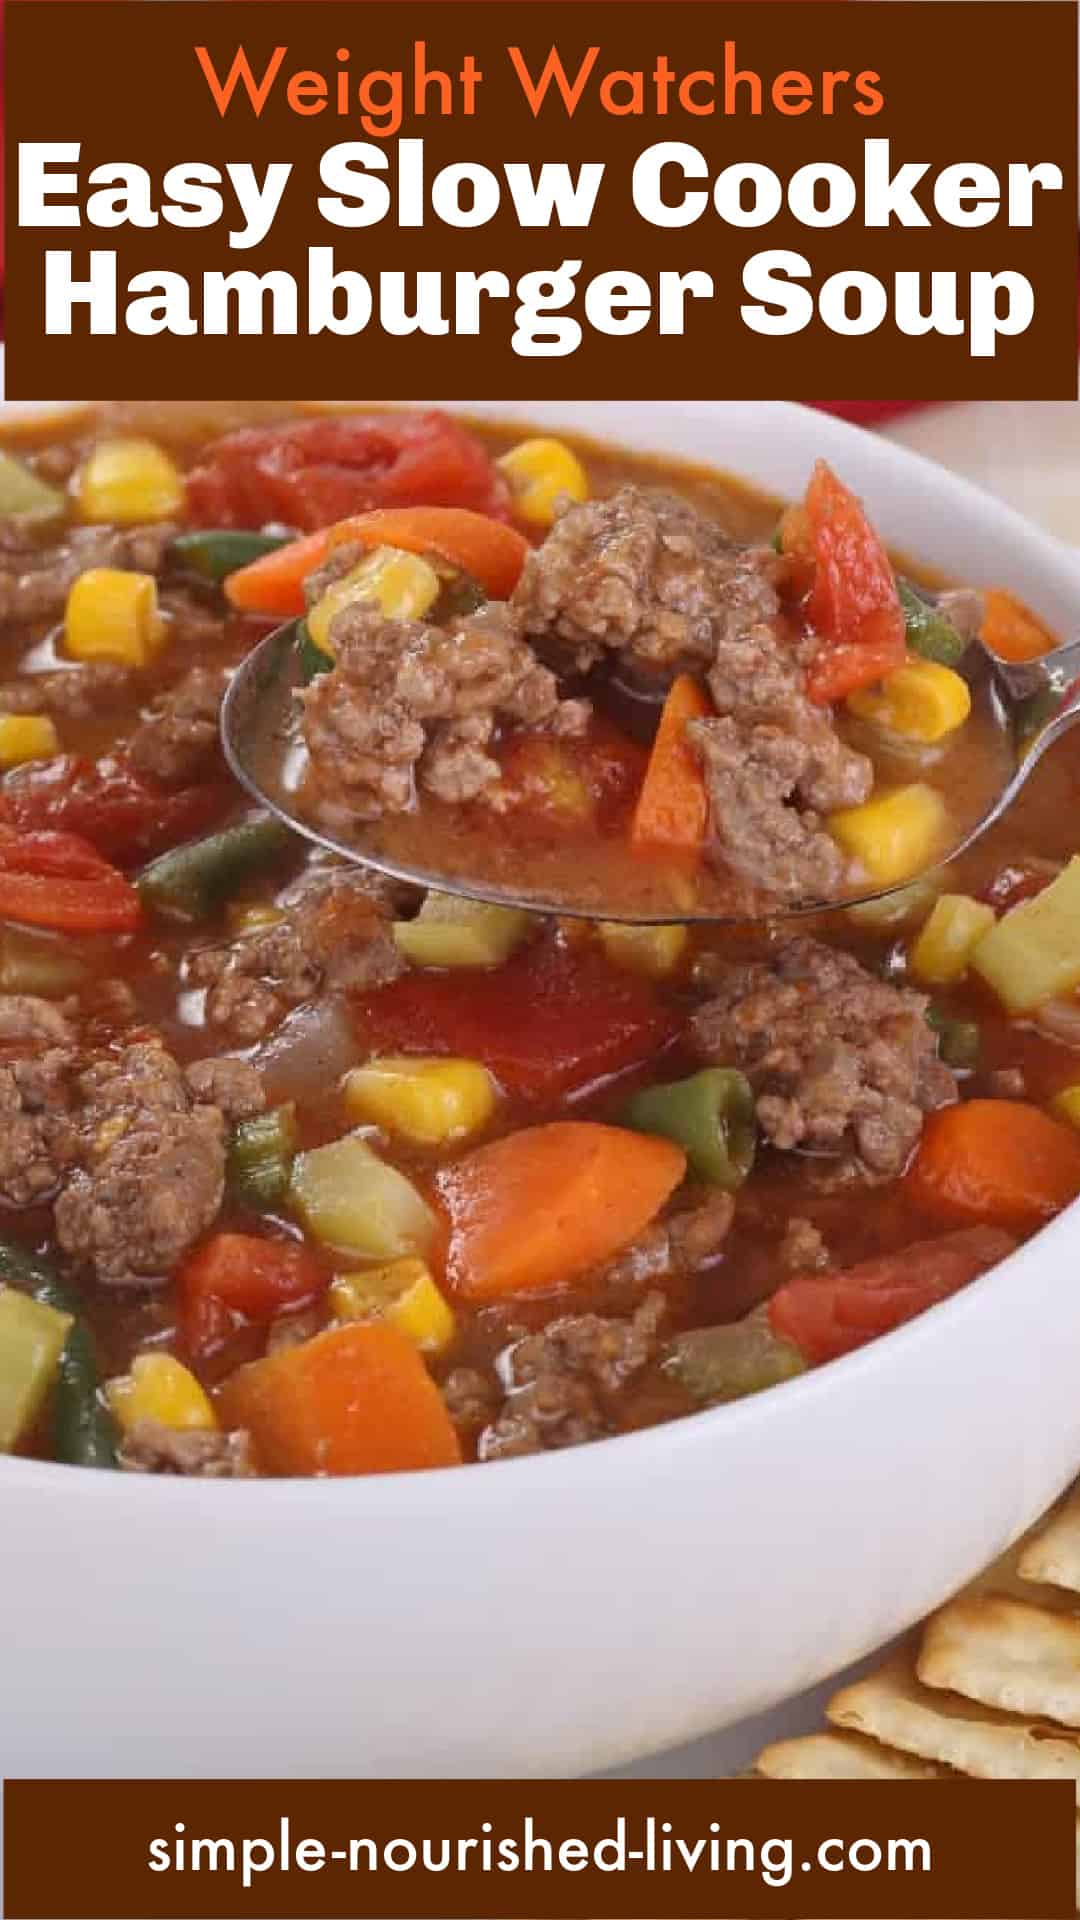 white bowl of hamburger soup with vegetables with brown text box: weight watchers easy slow cooker hamburger soup